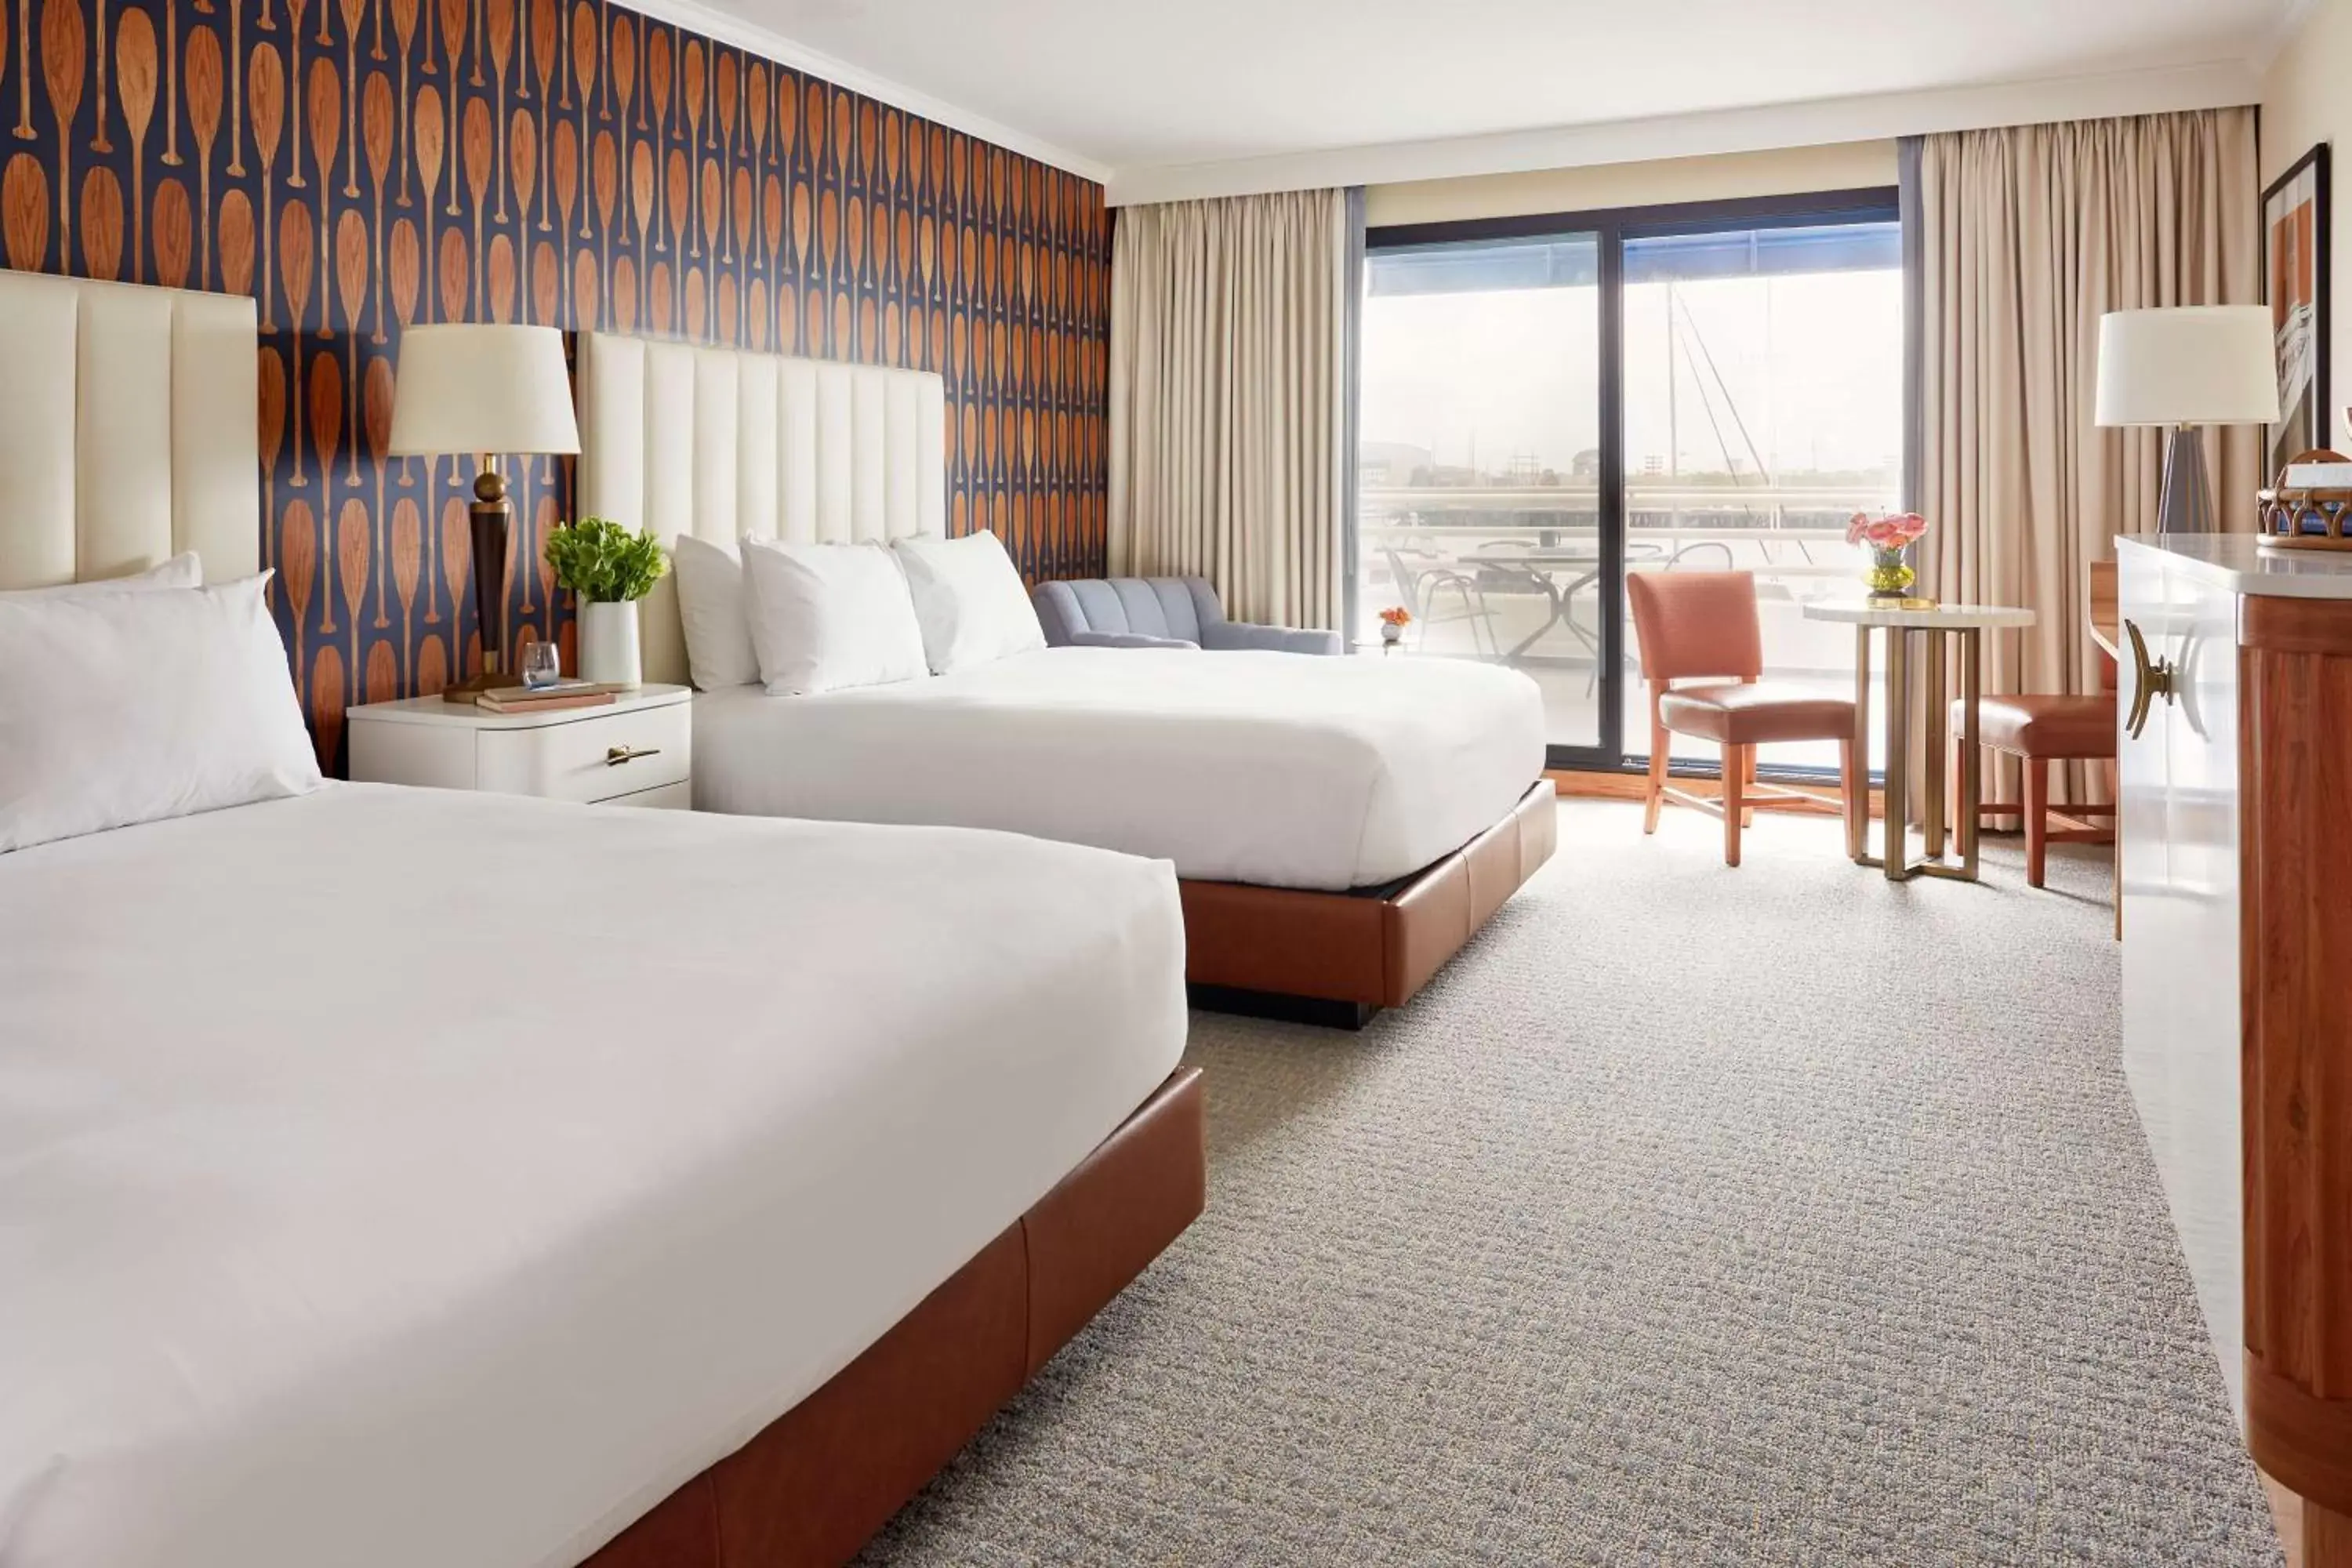 Queen Room with Two Queen Beds and Marina View in Waterfront Hotel, part of JdV by Hyatt